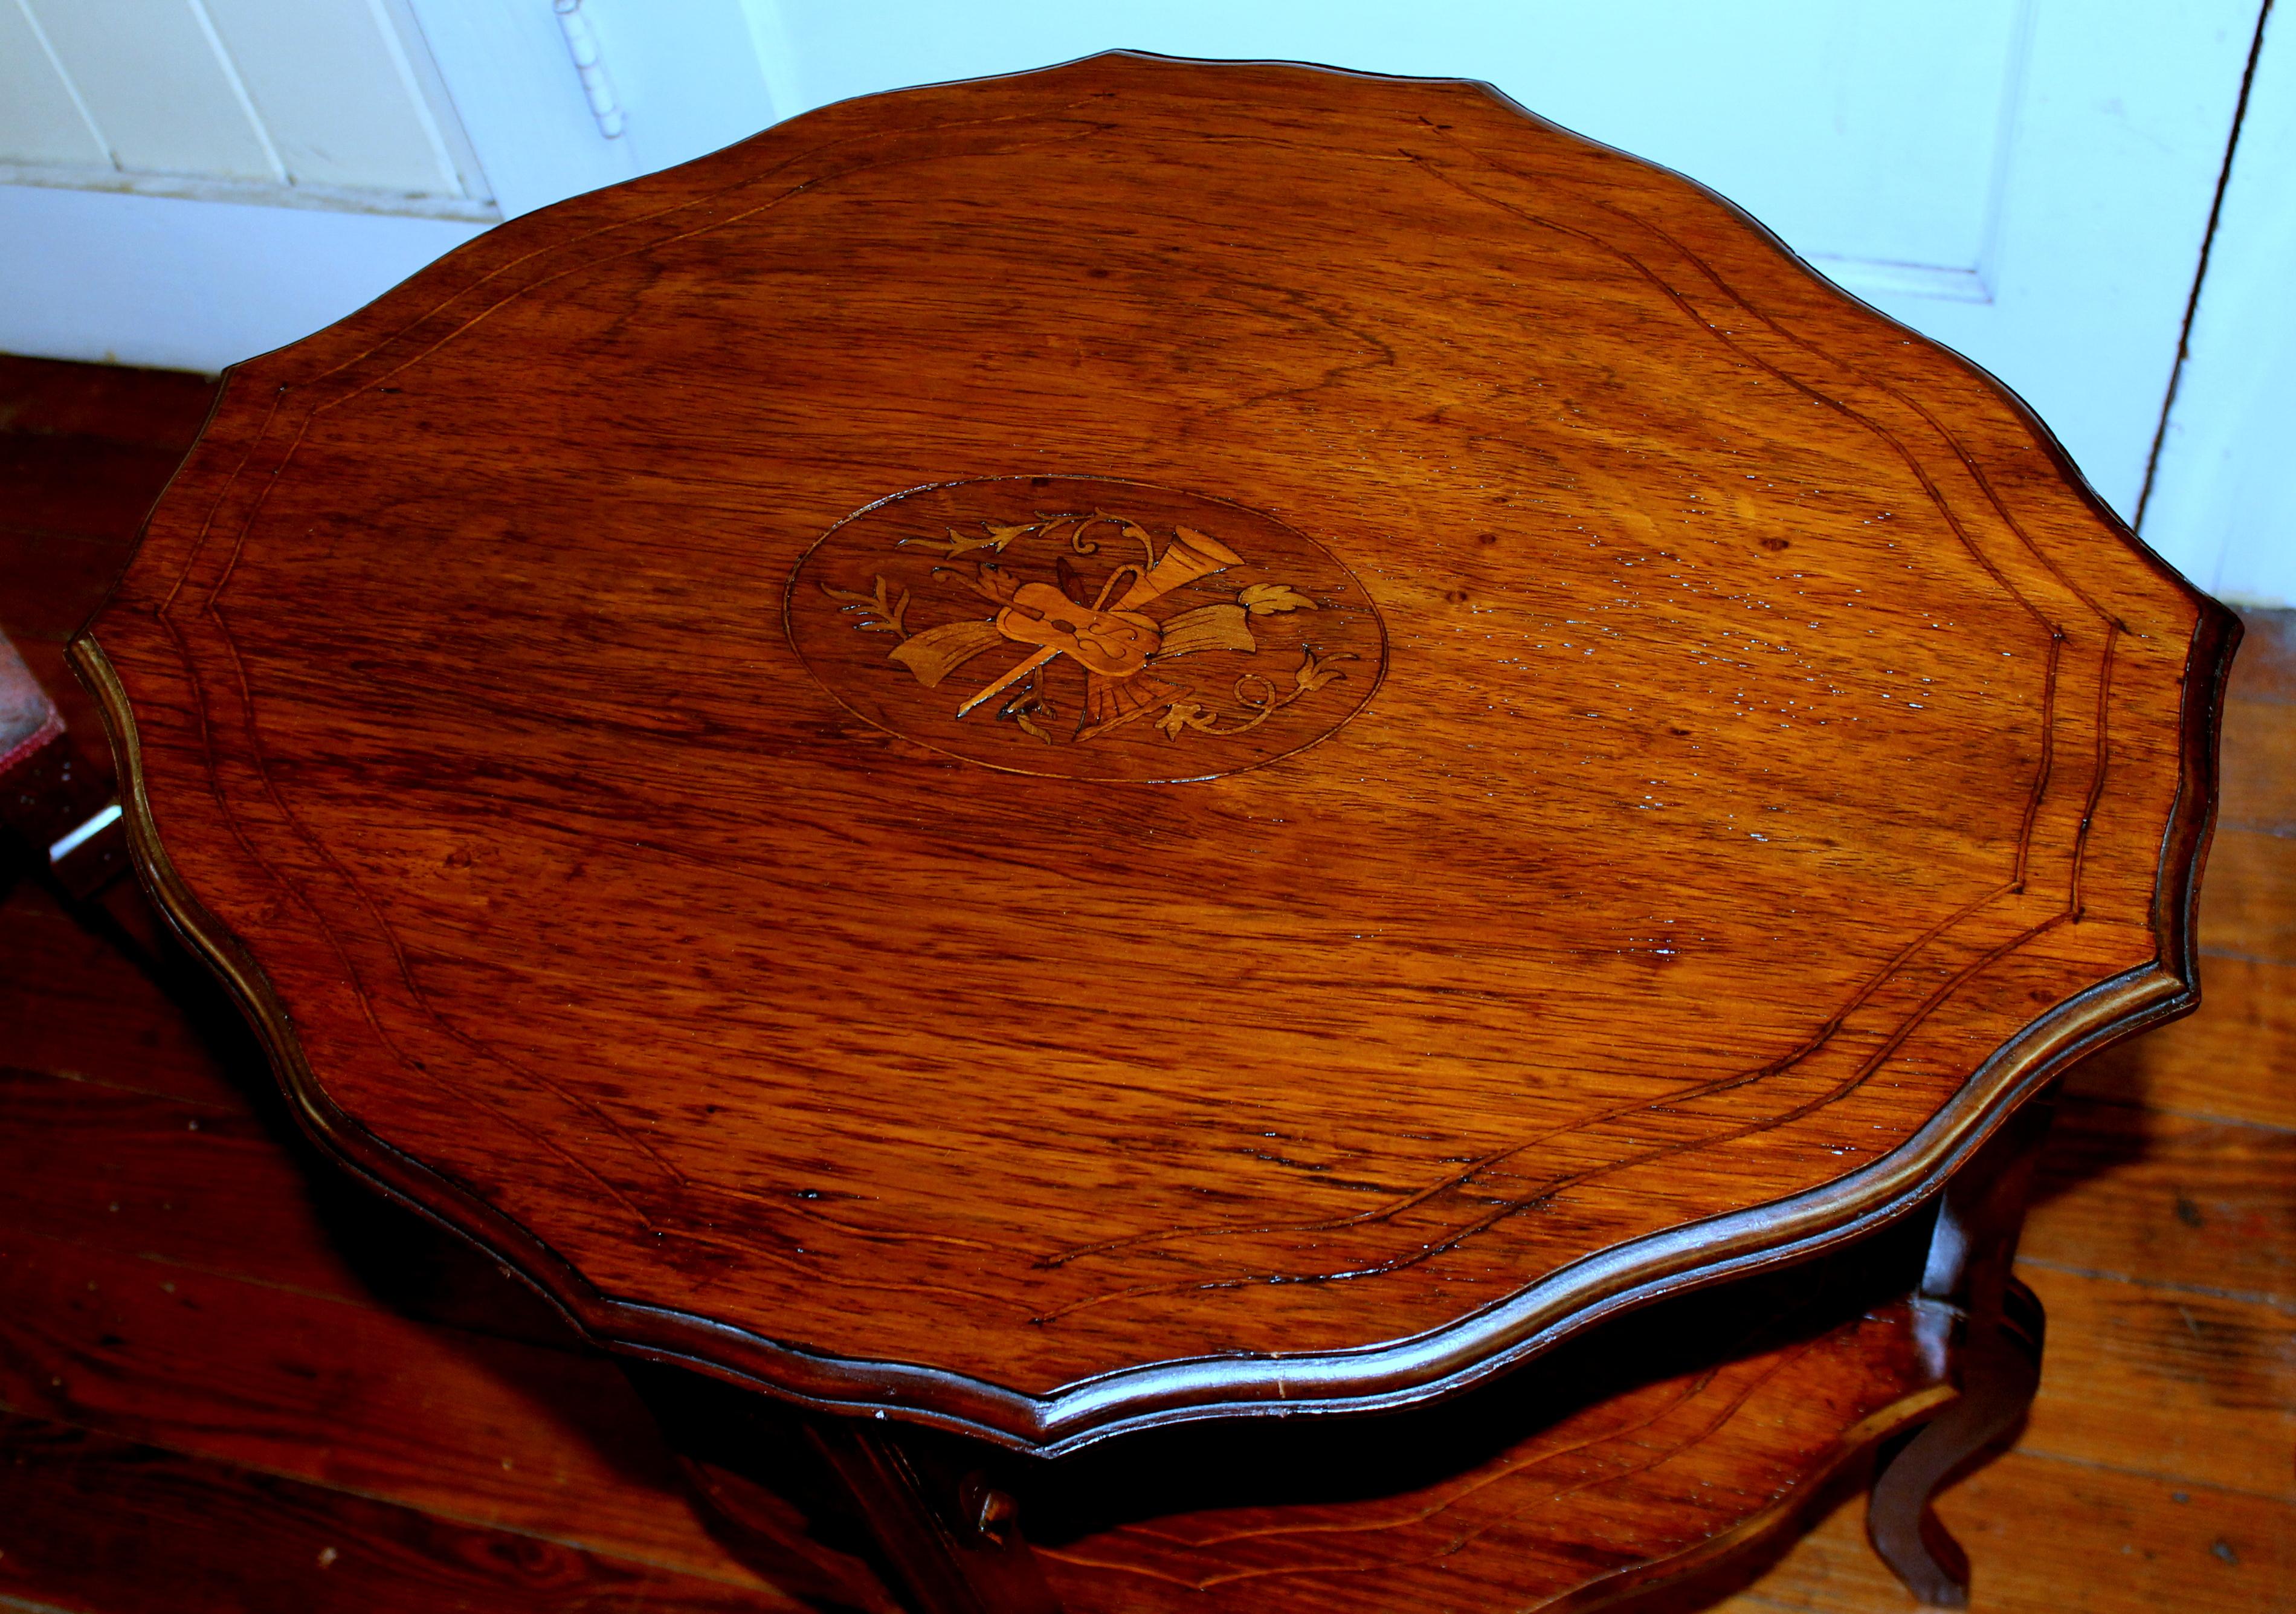 Hand-Crafted Antique English Signed Inlaid Rosewood Music Motif Oblong Occasional Table